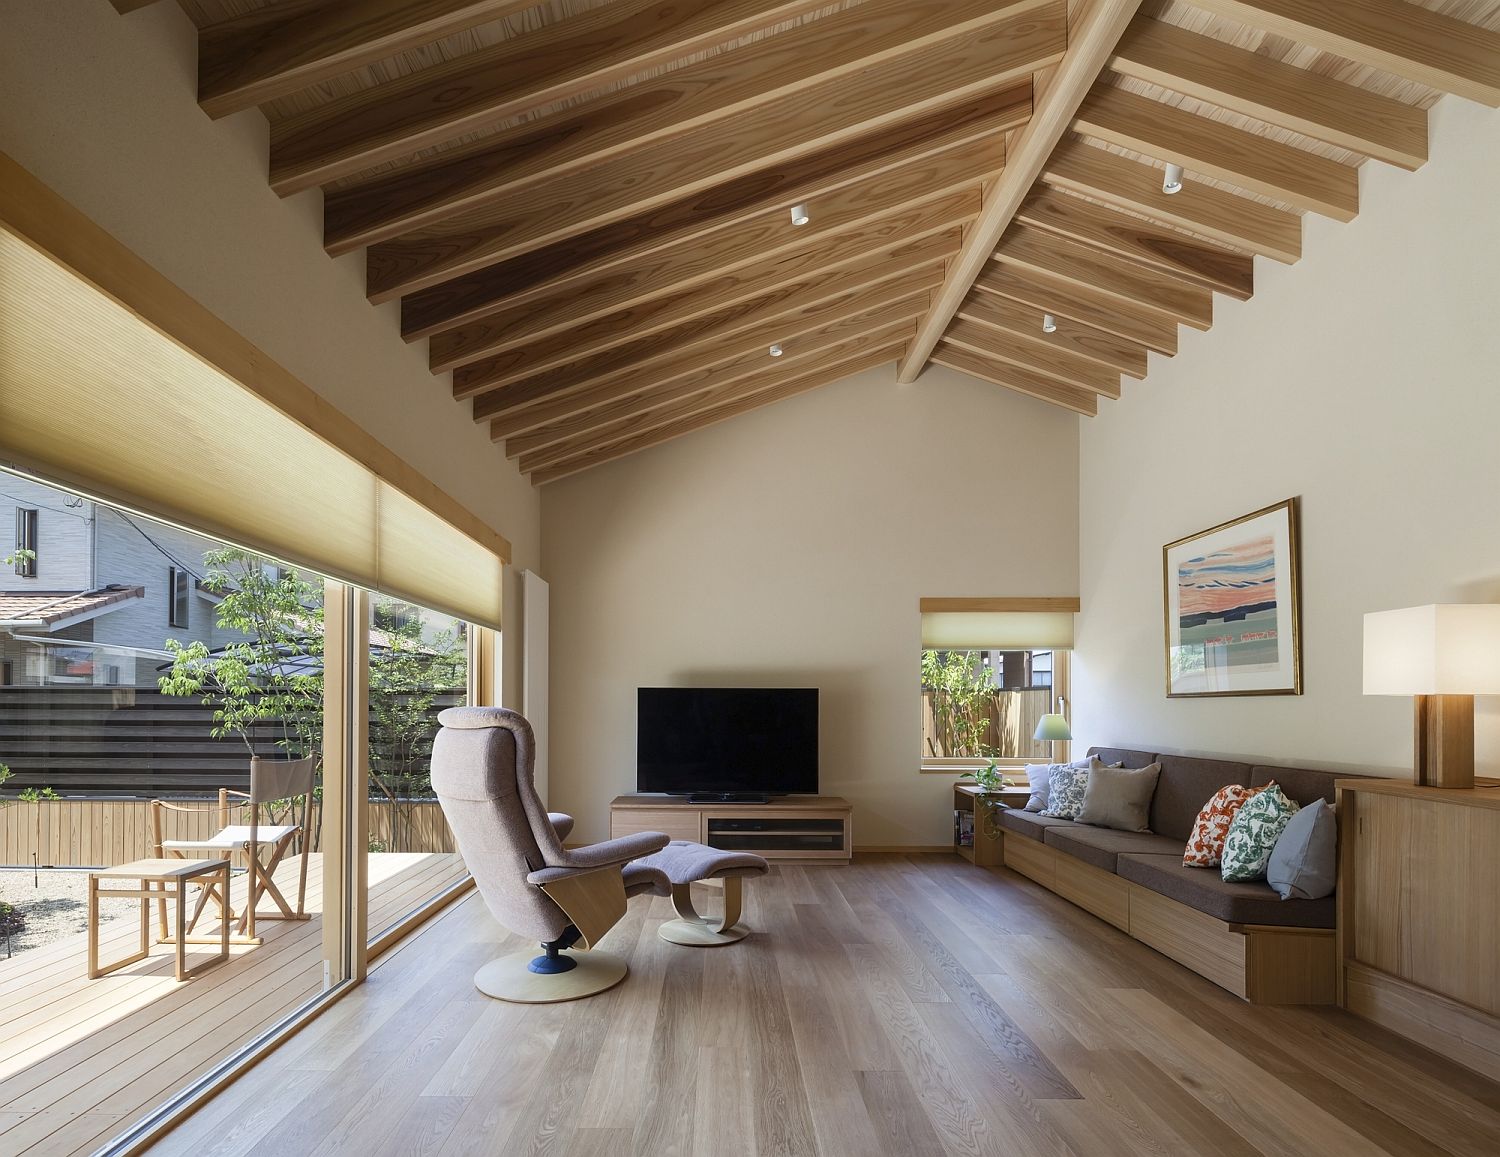 Living-room-of-the-Japanese-home-connected-with-the-wooden-deck-outside